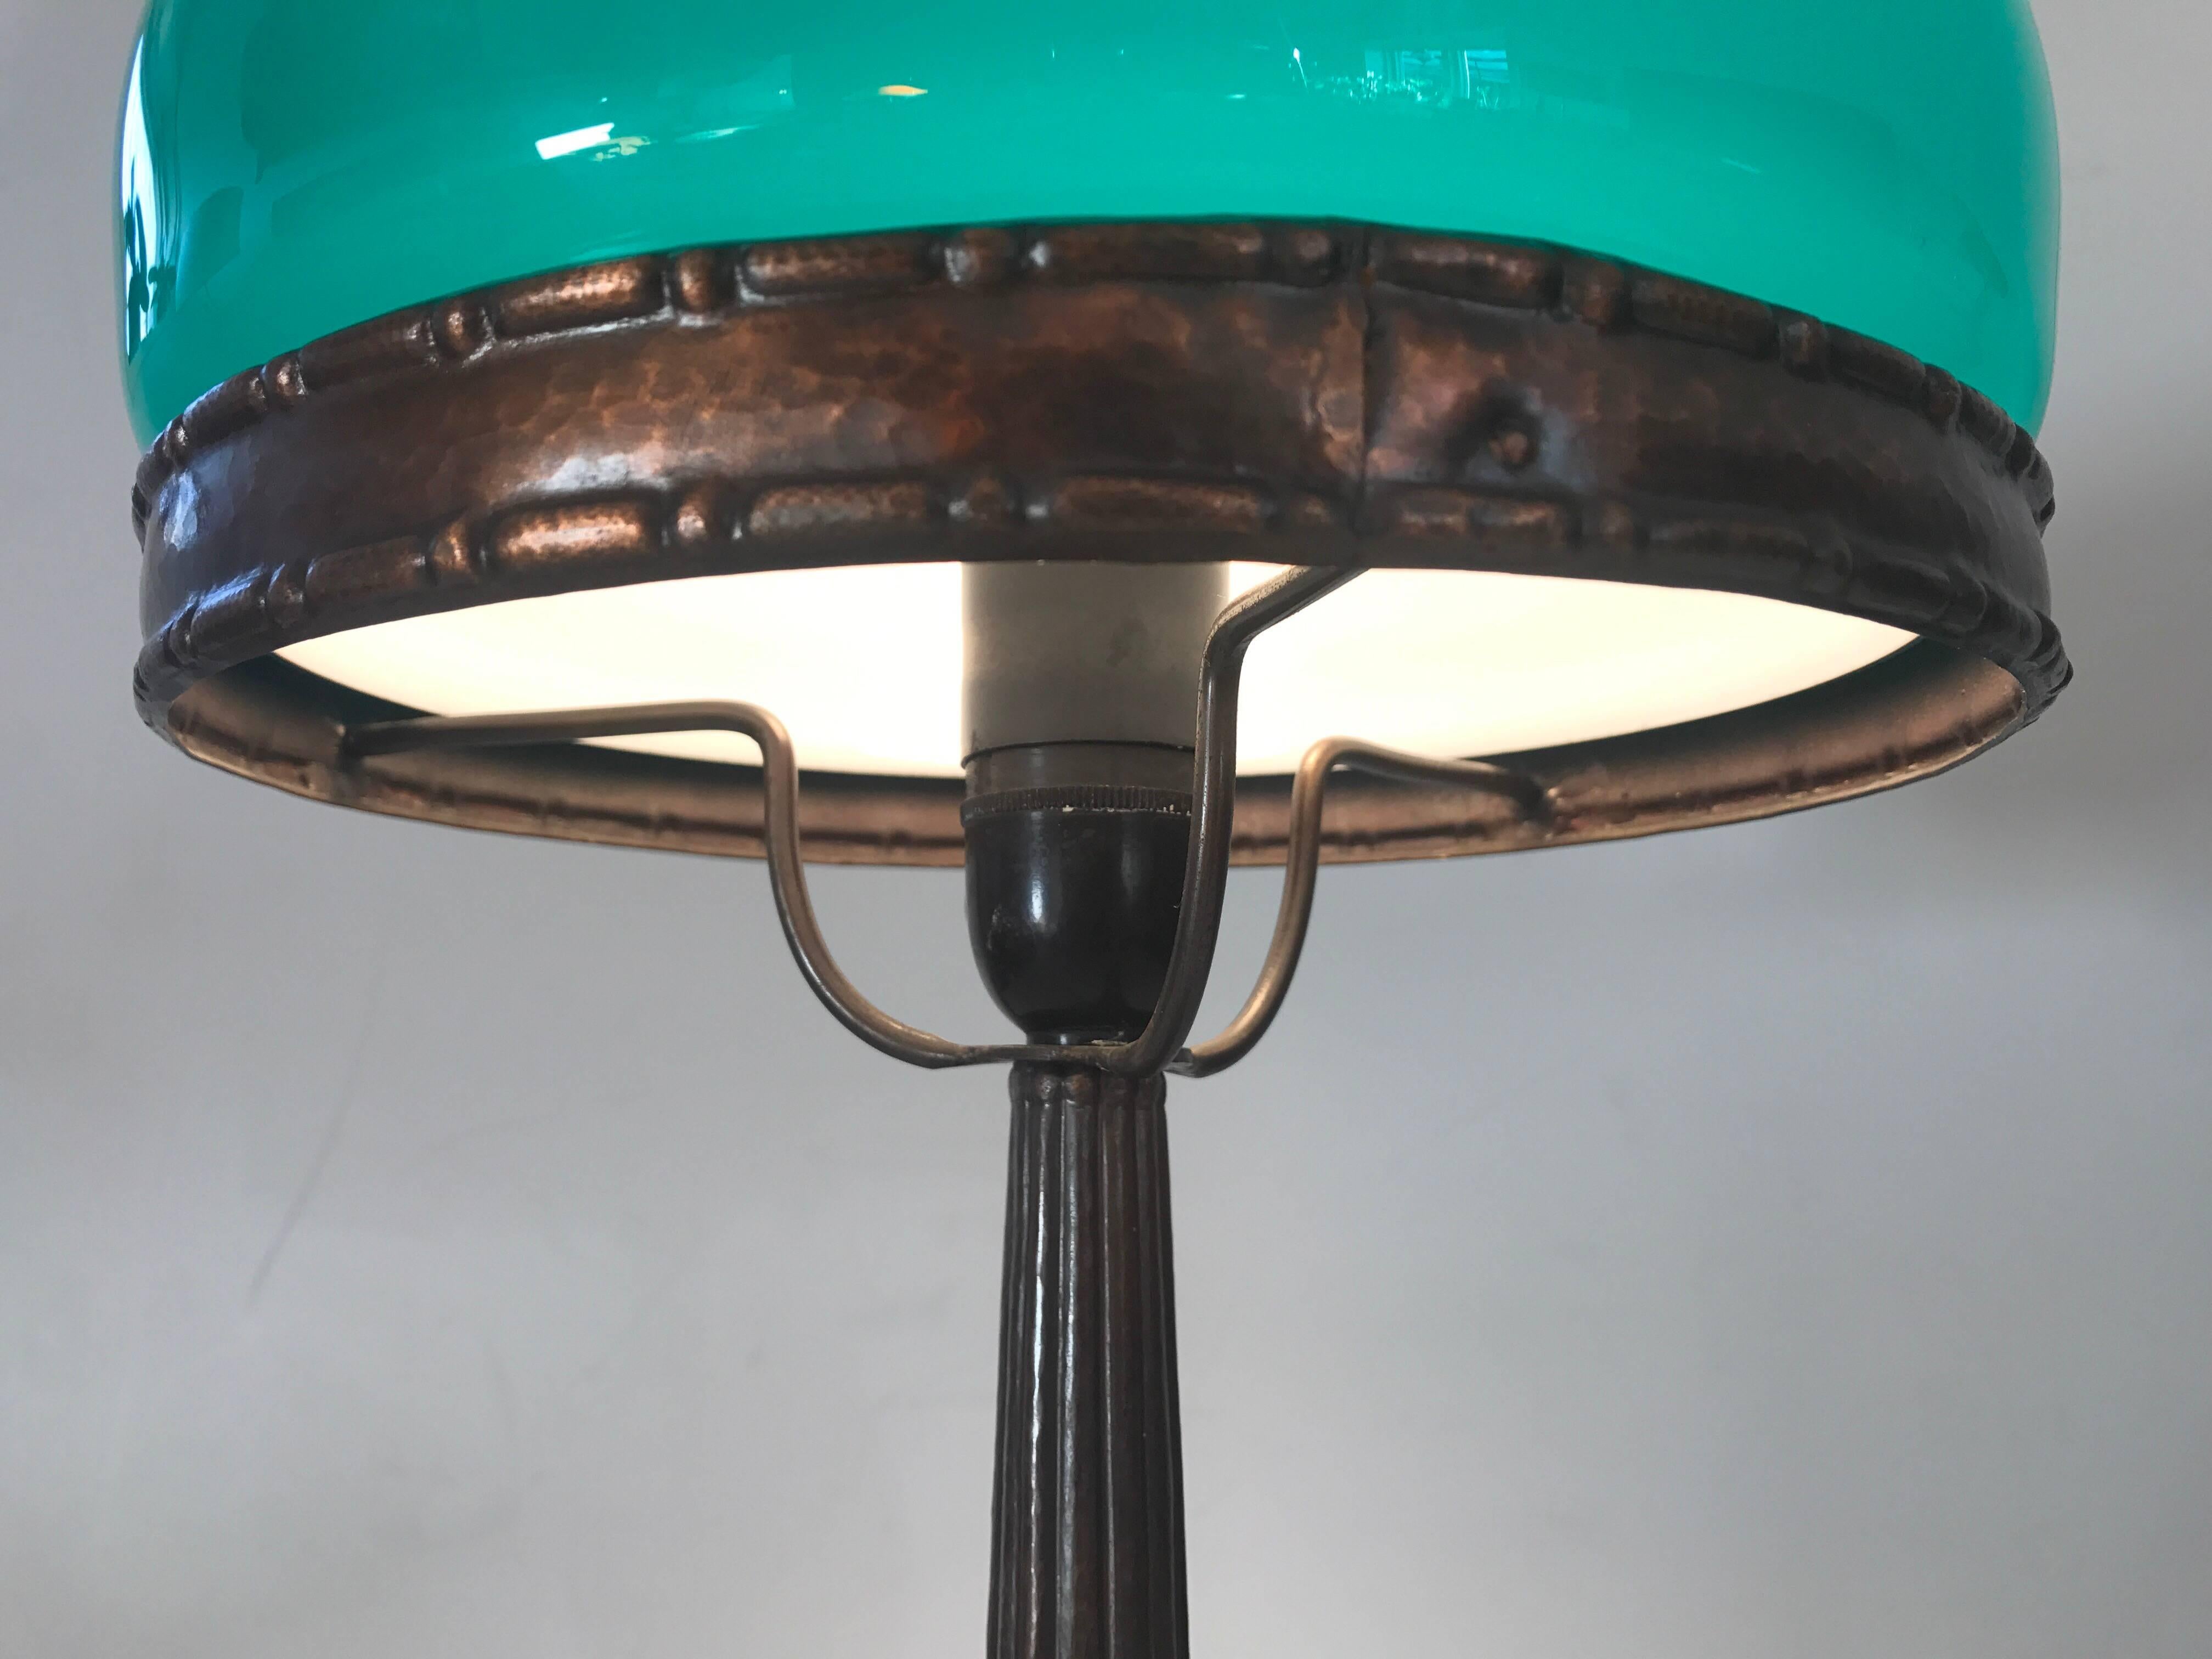 Early 20th Century Swedish Art Nouveau Jugendstil 1920 Copper and Glass Table Lamp